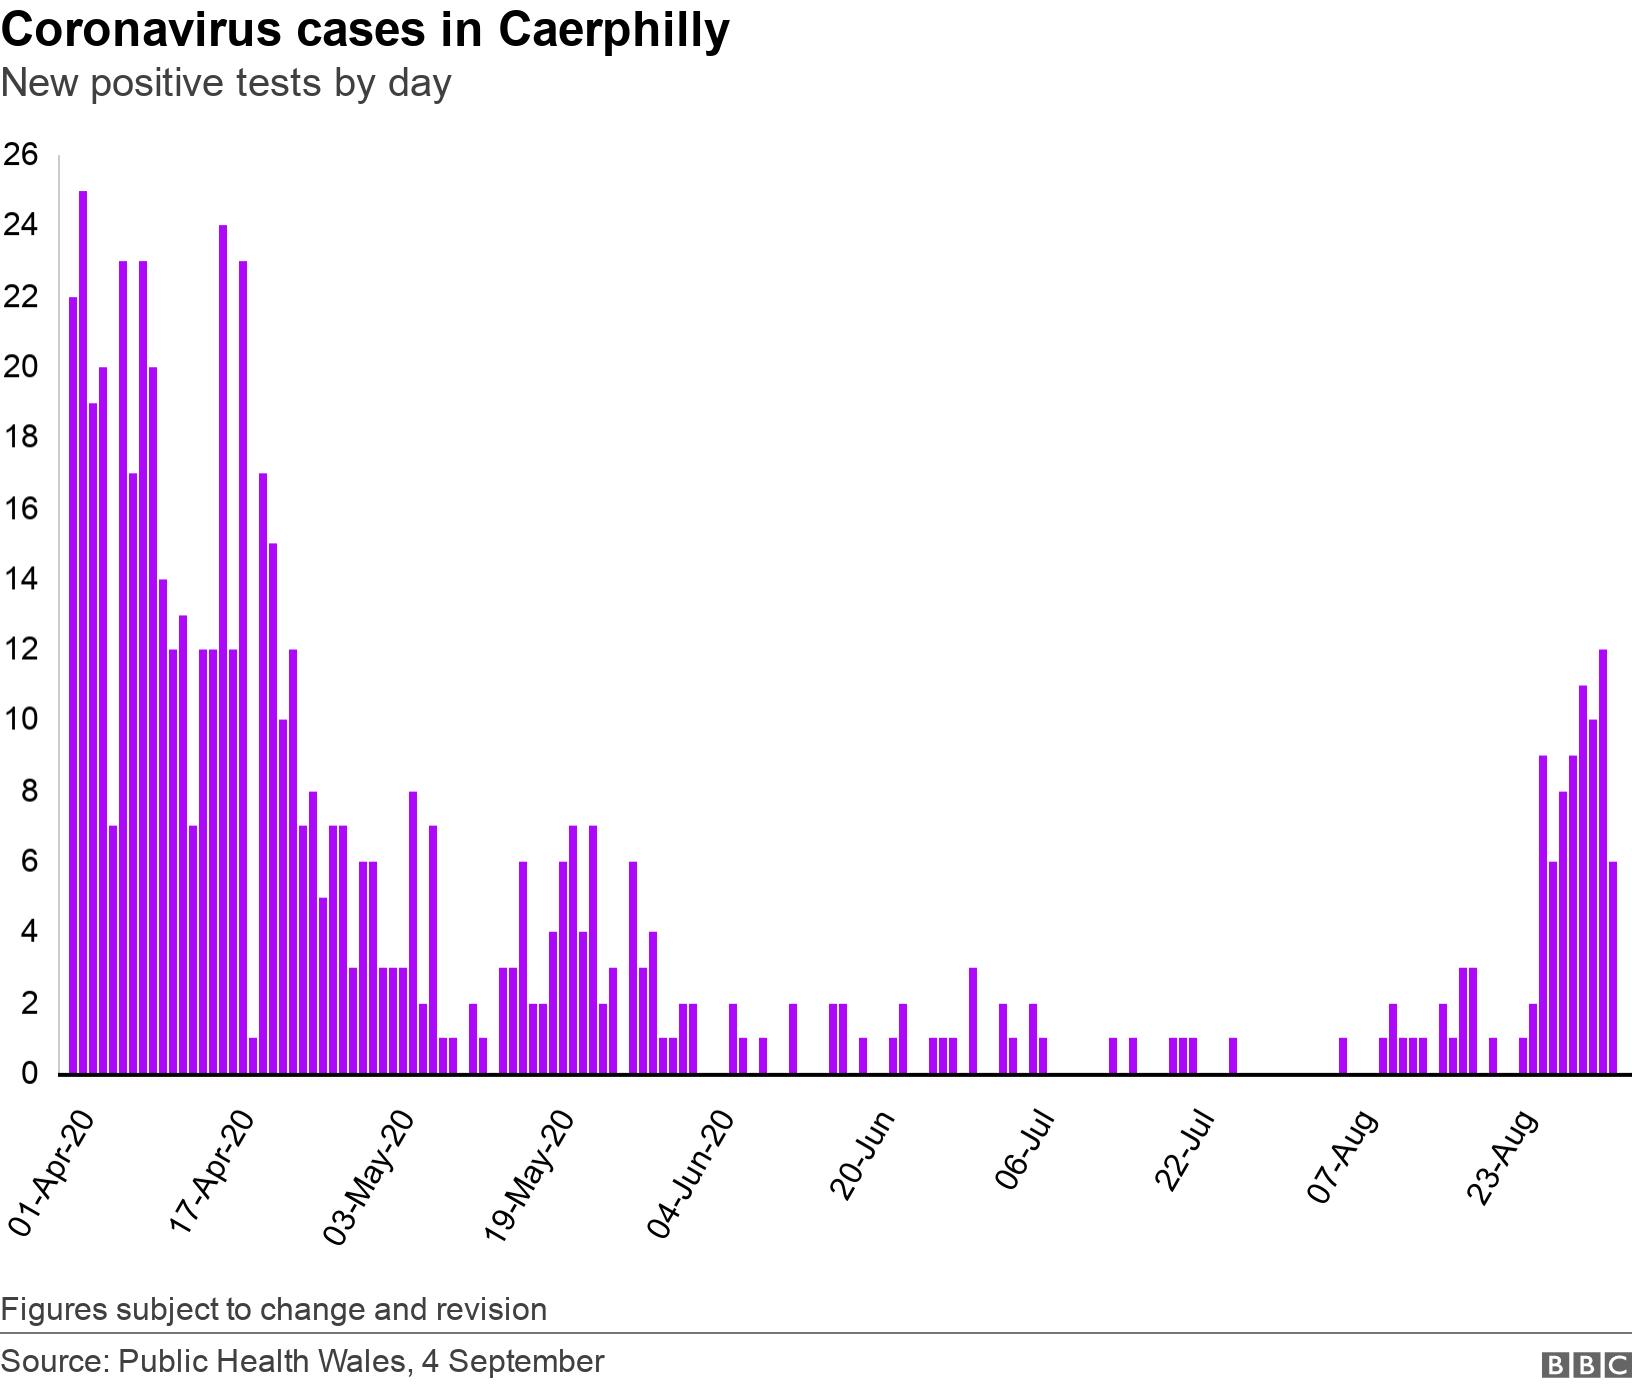 Coronavirus cases in Caerphilly. New positive tests by day.  Figures subject to change and revision.